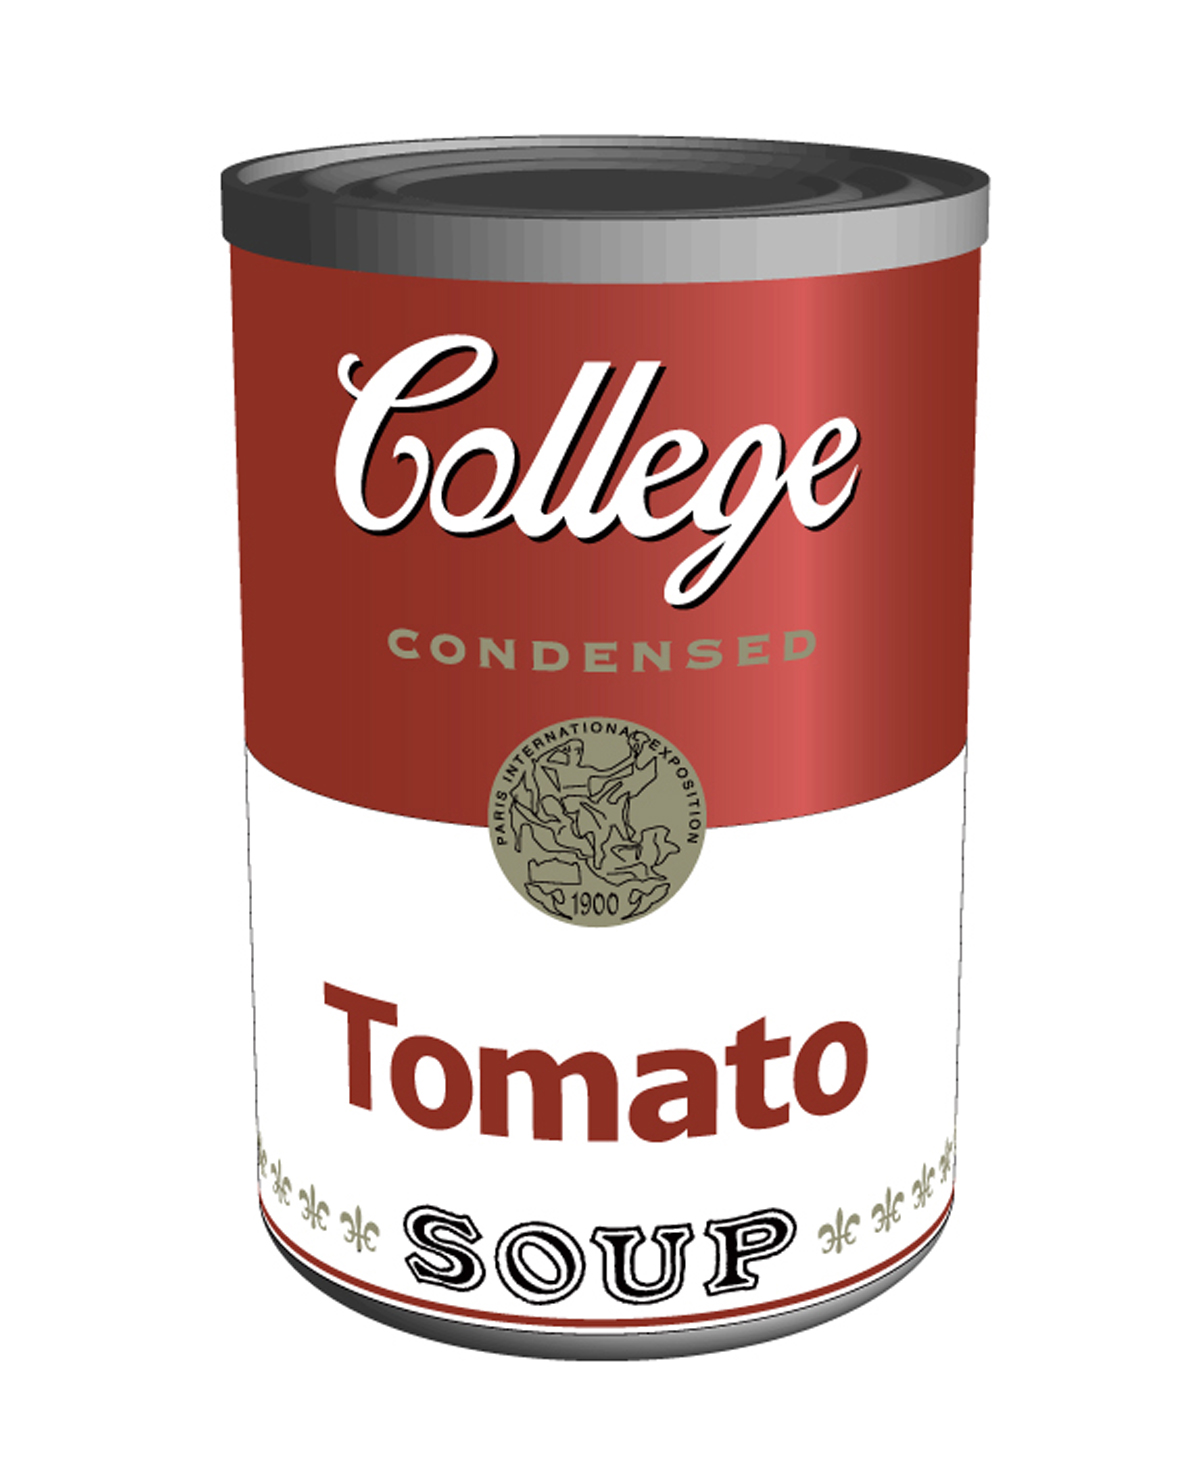 A rendering of a can in the style of Campbell's tomato soup, but with the word “Campbell's” replaced by the word “College.”